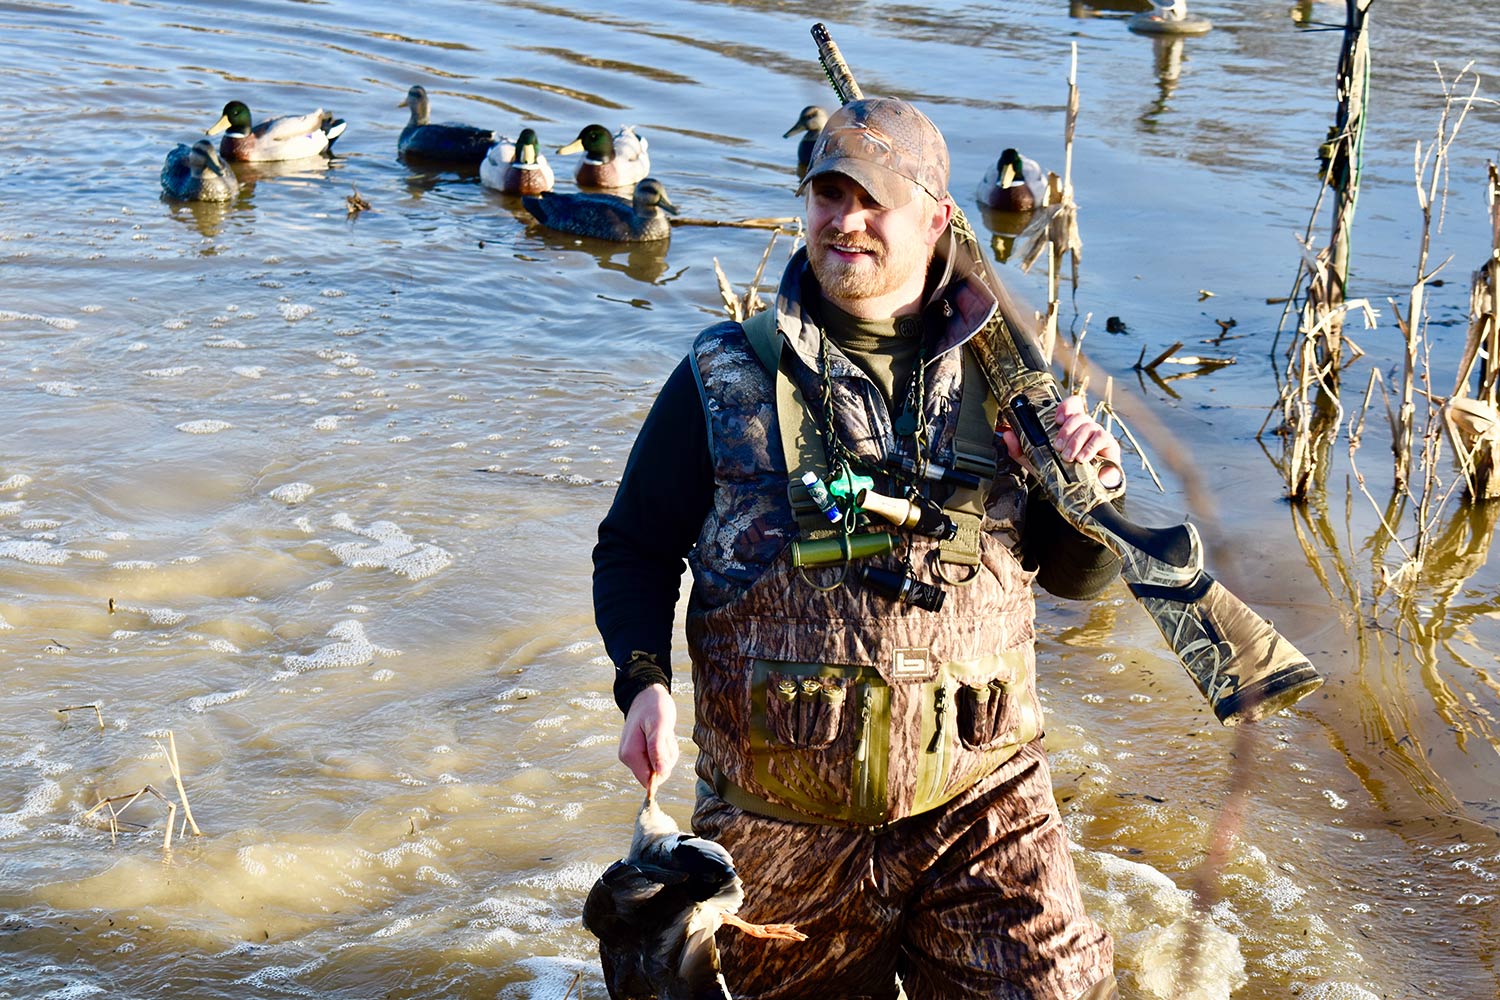 Hunter wading in a river carrying a shotgun and a duck.